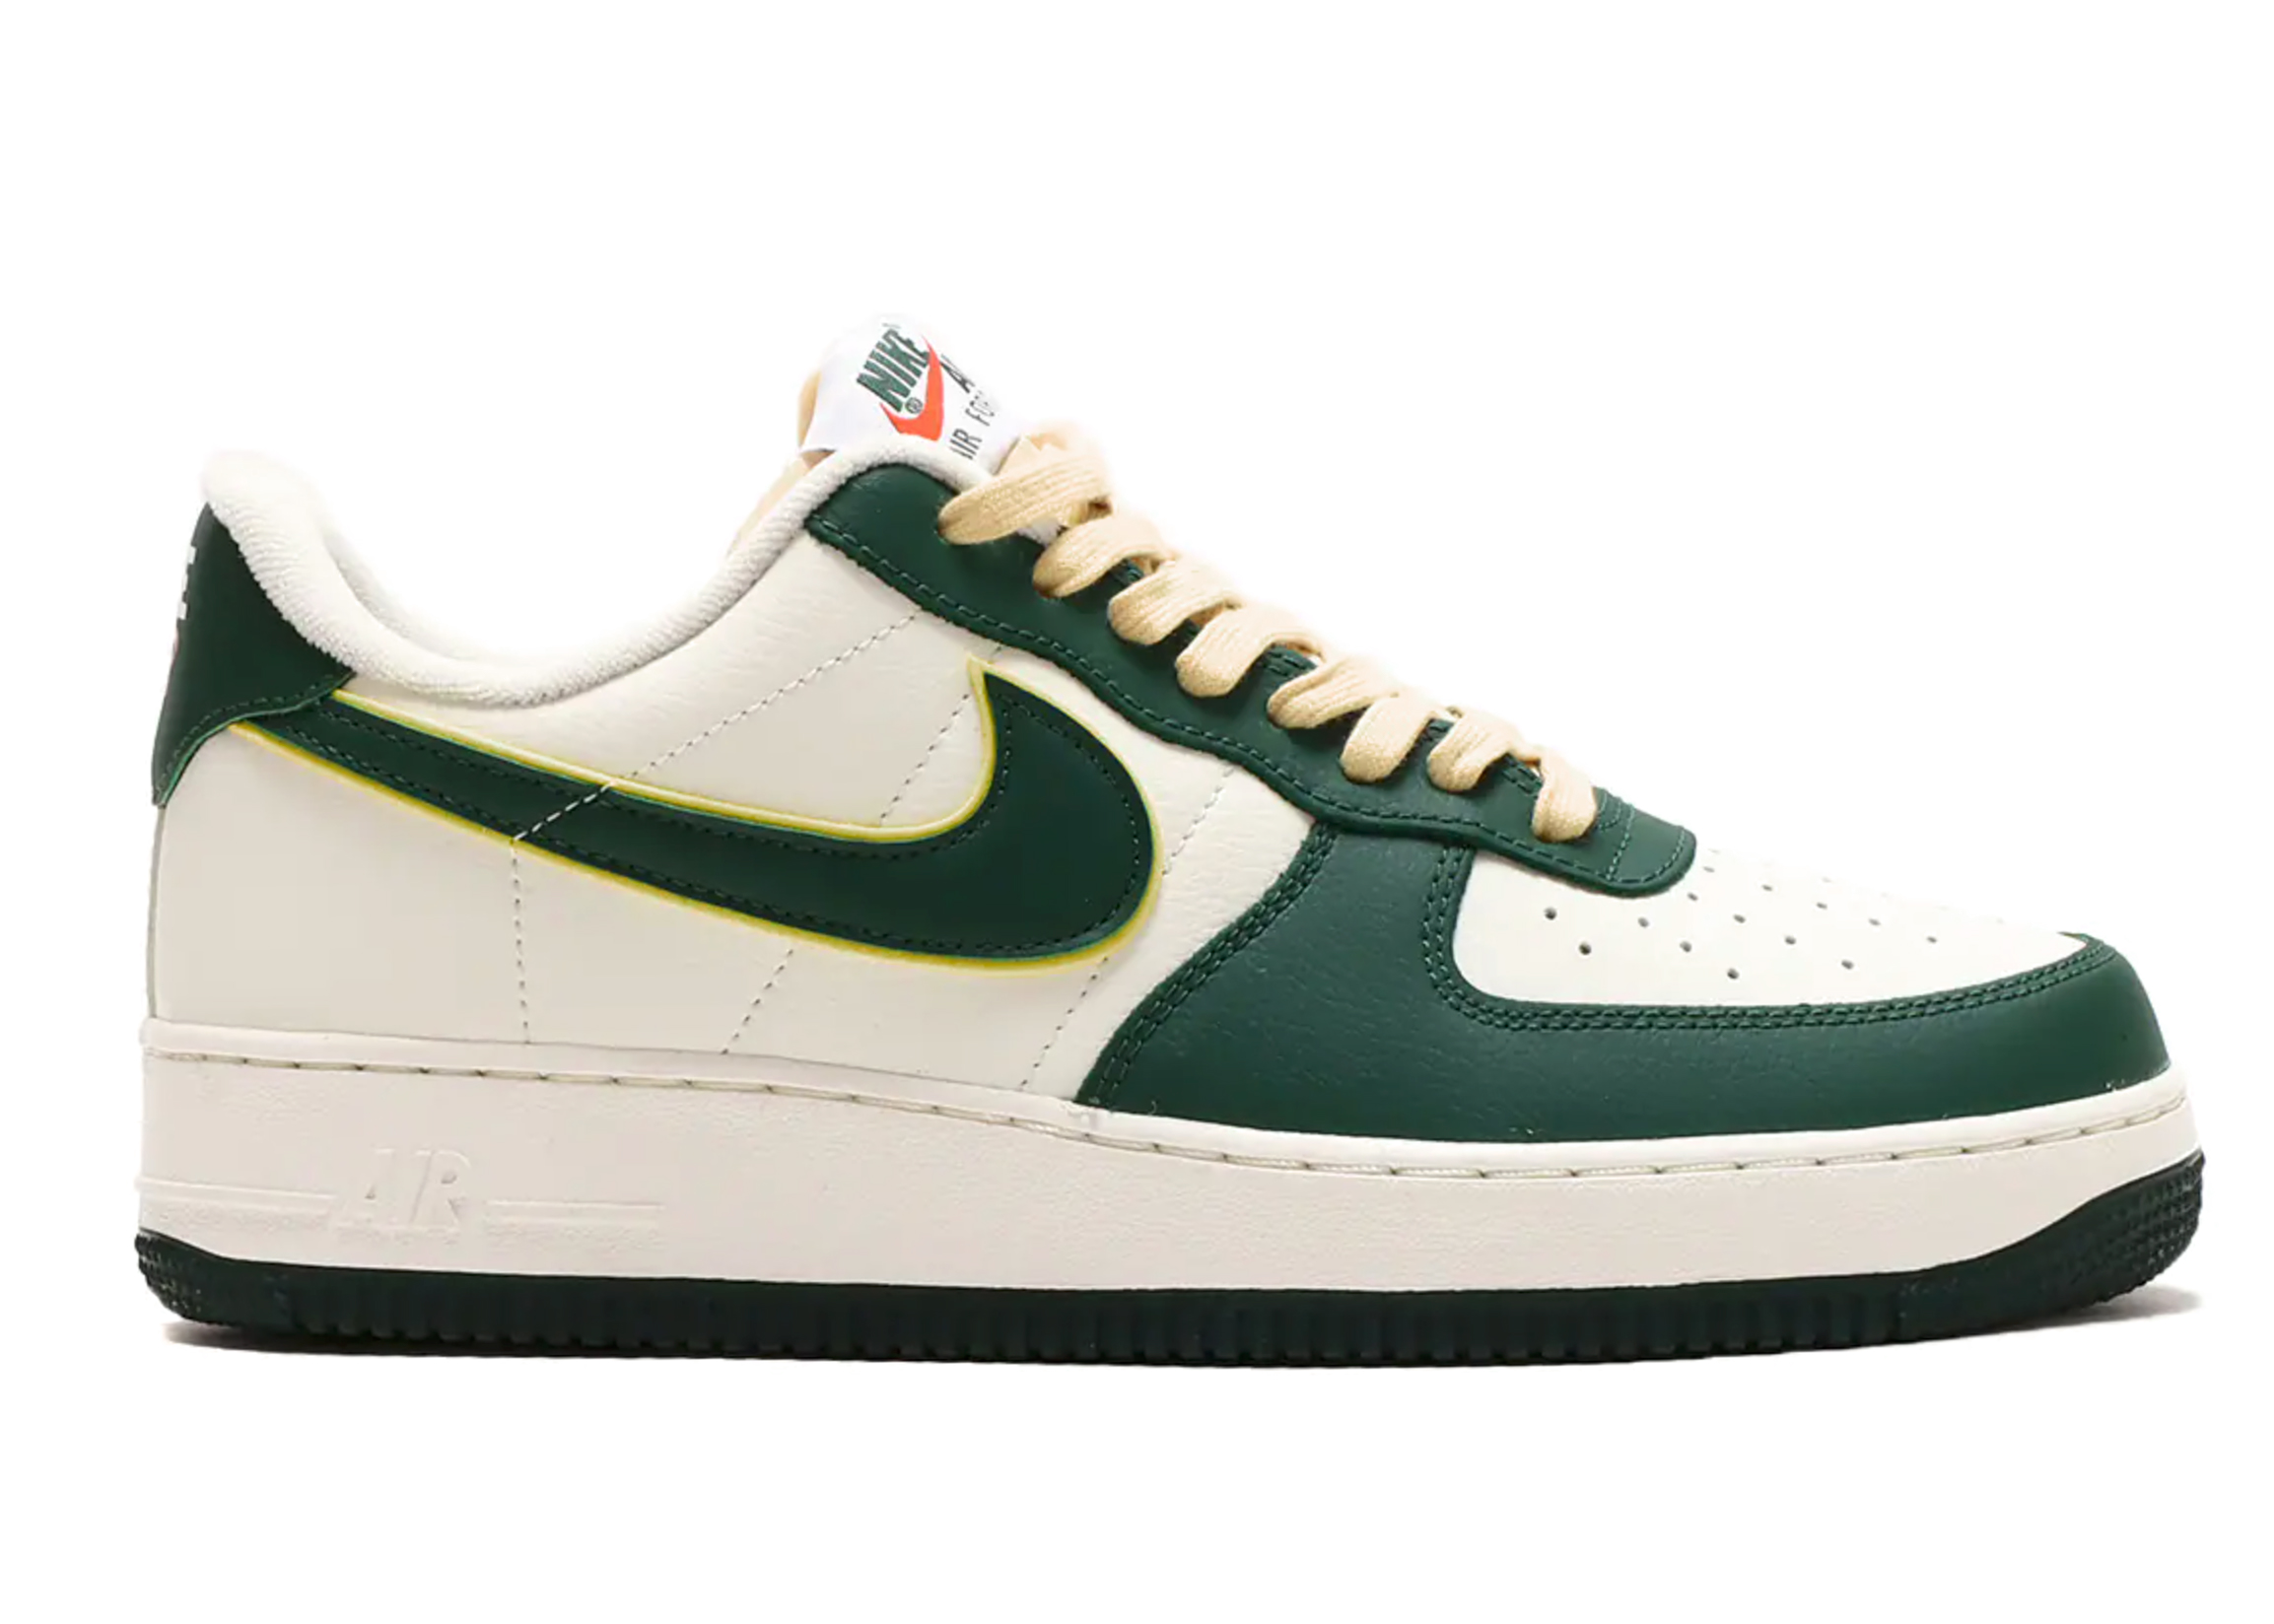 Nike Air Force 1 Low 07 LV8 Noble Green Sail